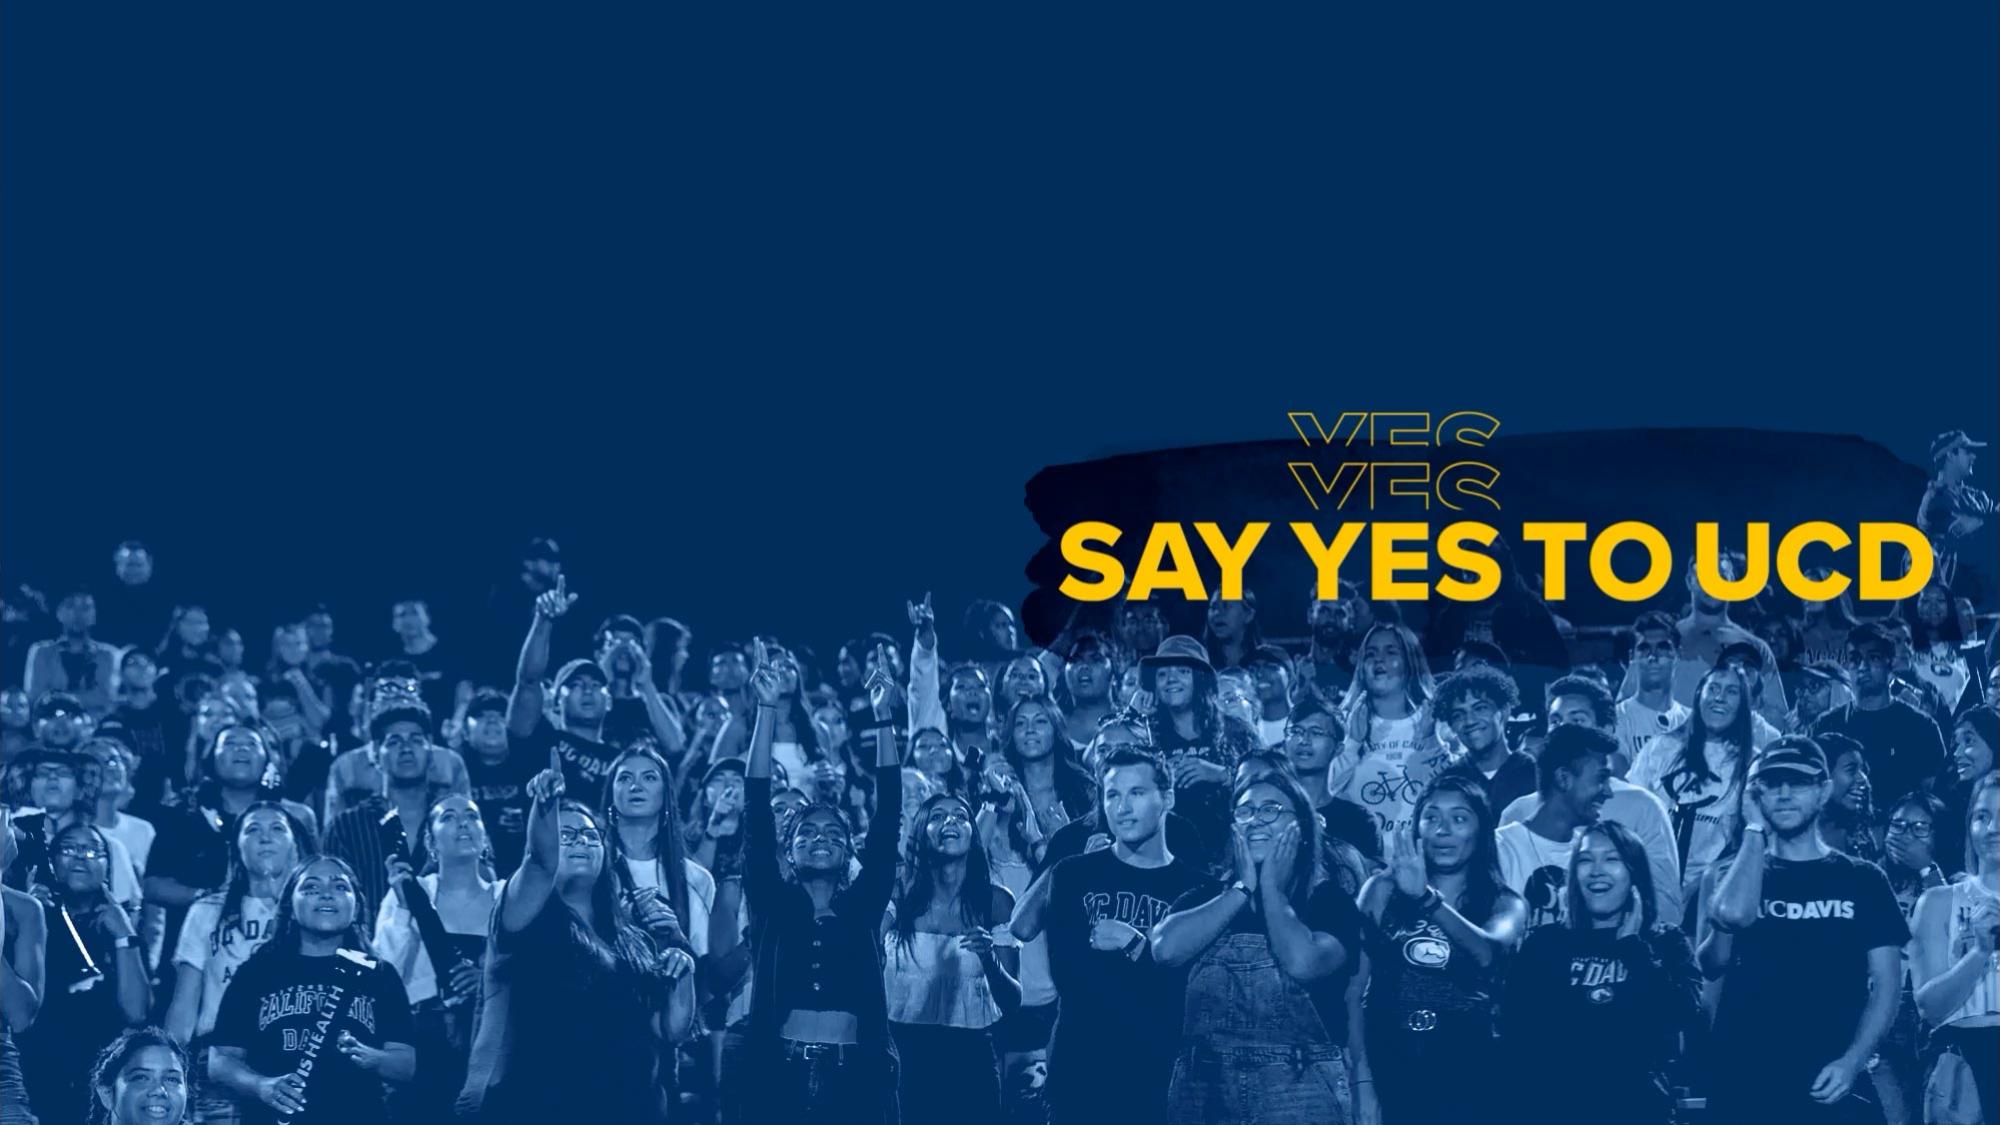 A blue tone image of a large group of students cheering with "Say Yes! to UC Davis over it and confetti raining down